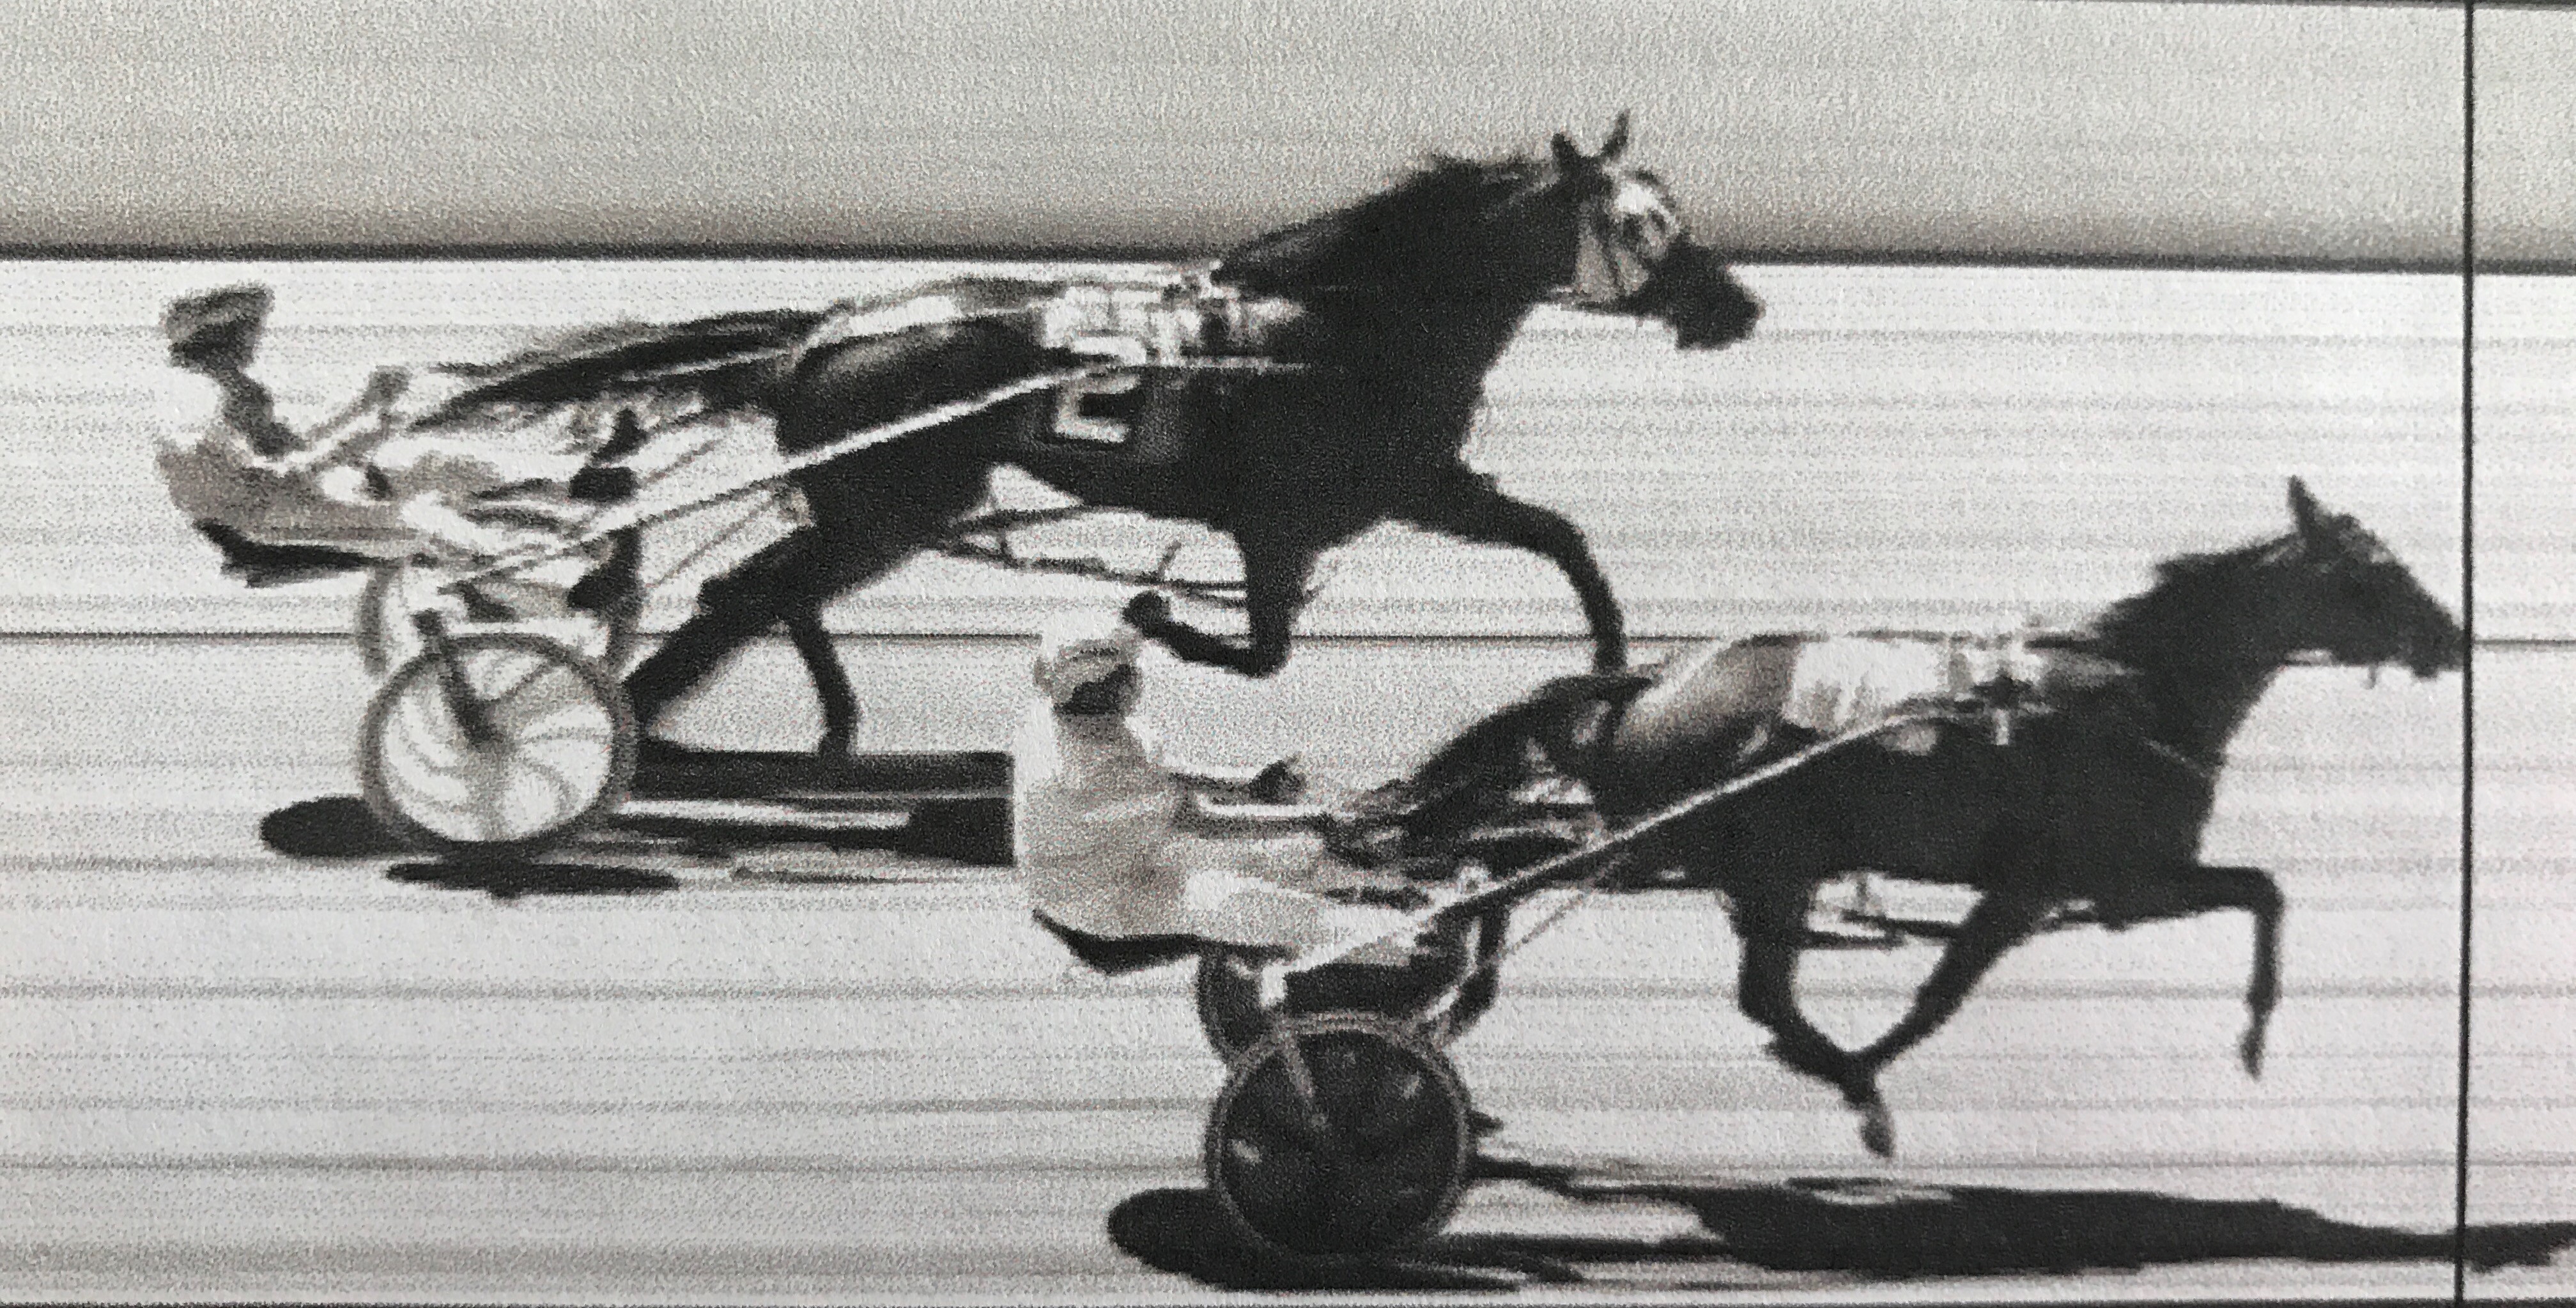 RECORD-BREAKER --- Venier Hanover, driven by co-owner Dave Brickell of Smicksburg, hits the finish line in 1:59.4 to break the Driving Park standard for two-year-old colt pacers. Cirrus De Vie, with Roger Hammer in the sulky, was three-fourths of a length back in the Pennsylvania Sire Stakes "A" Colt Pace. (Photo by Jane Linscott courtesy of Linscott Photography).